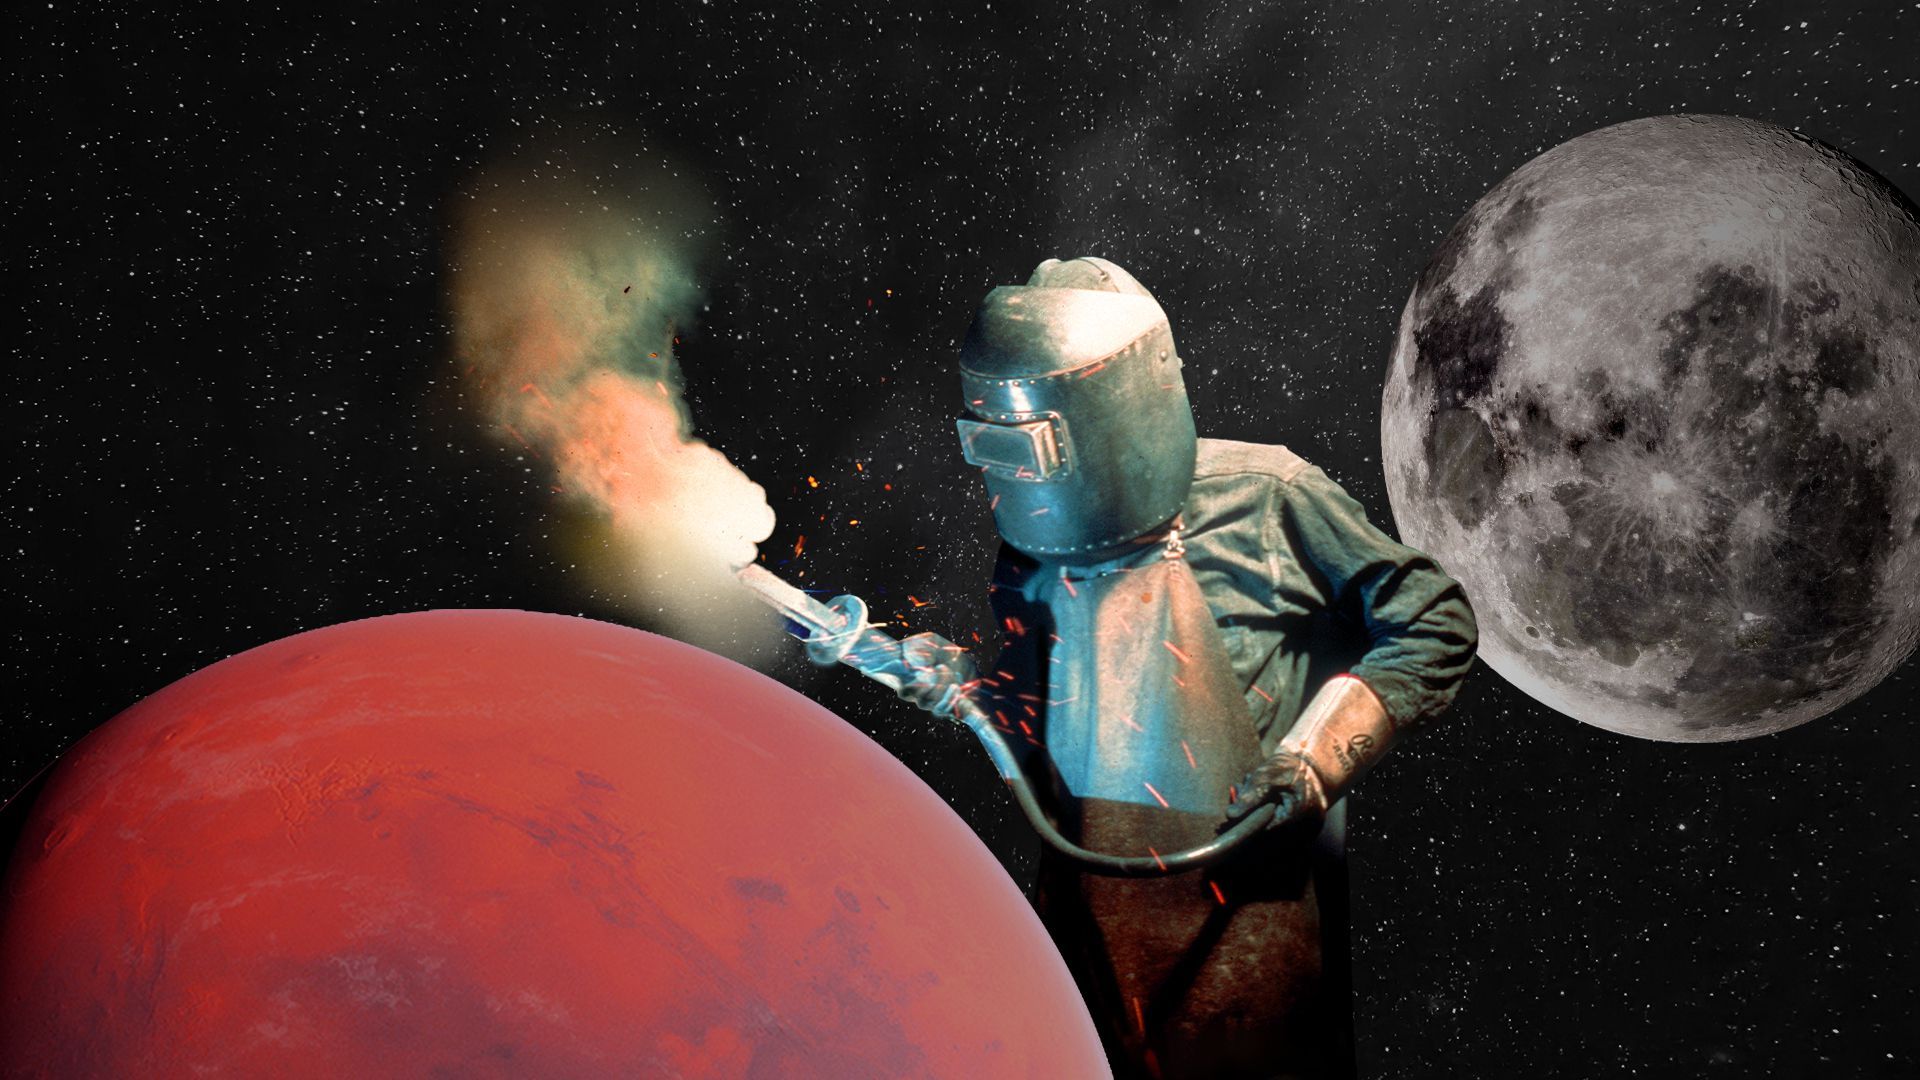 Photo illustration of a welder working over a red planet with the moon in the background